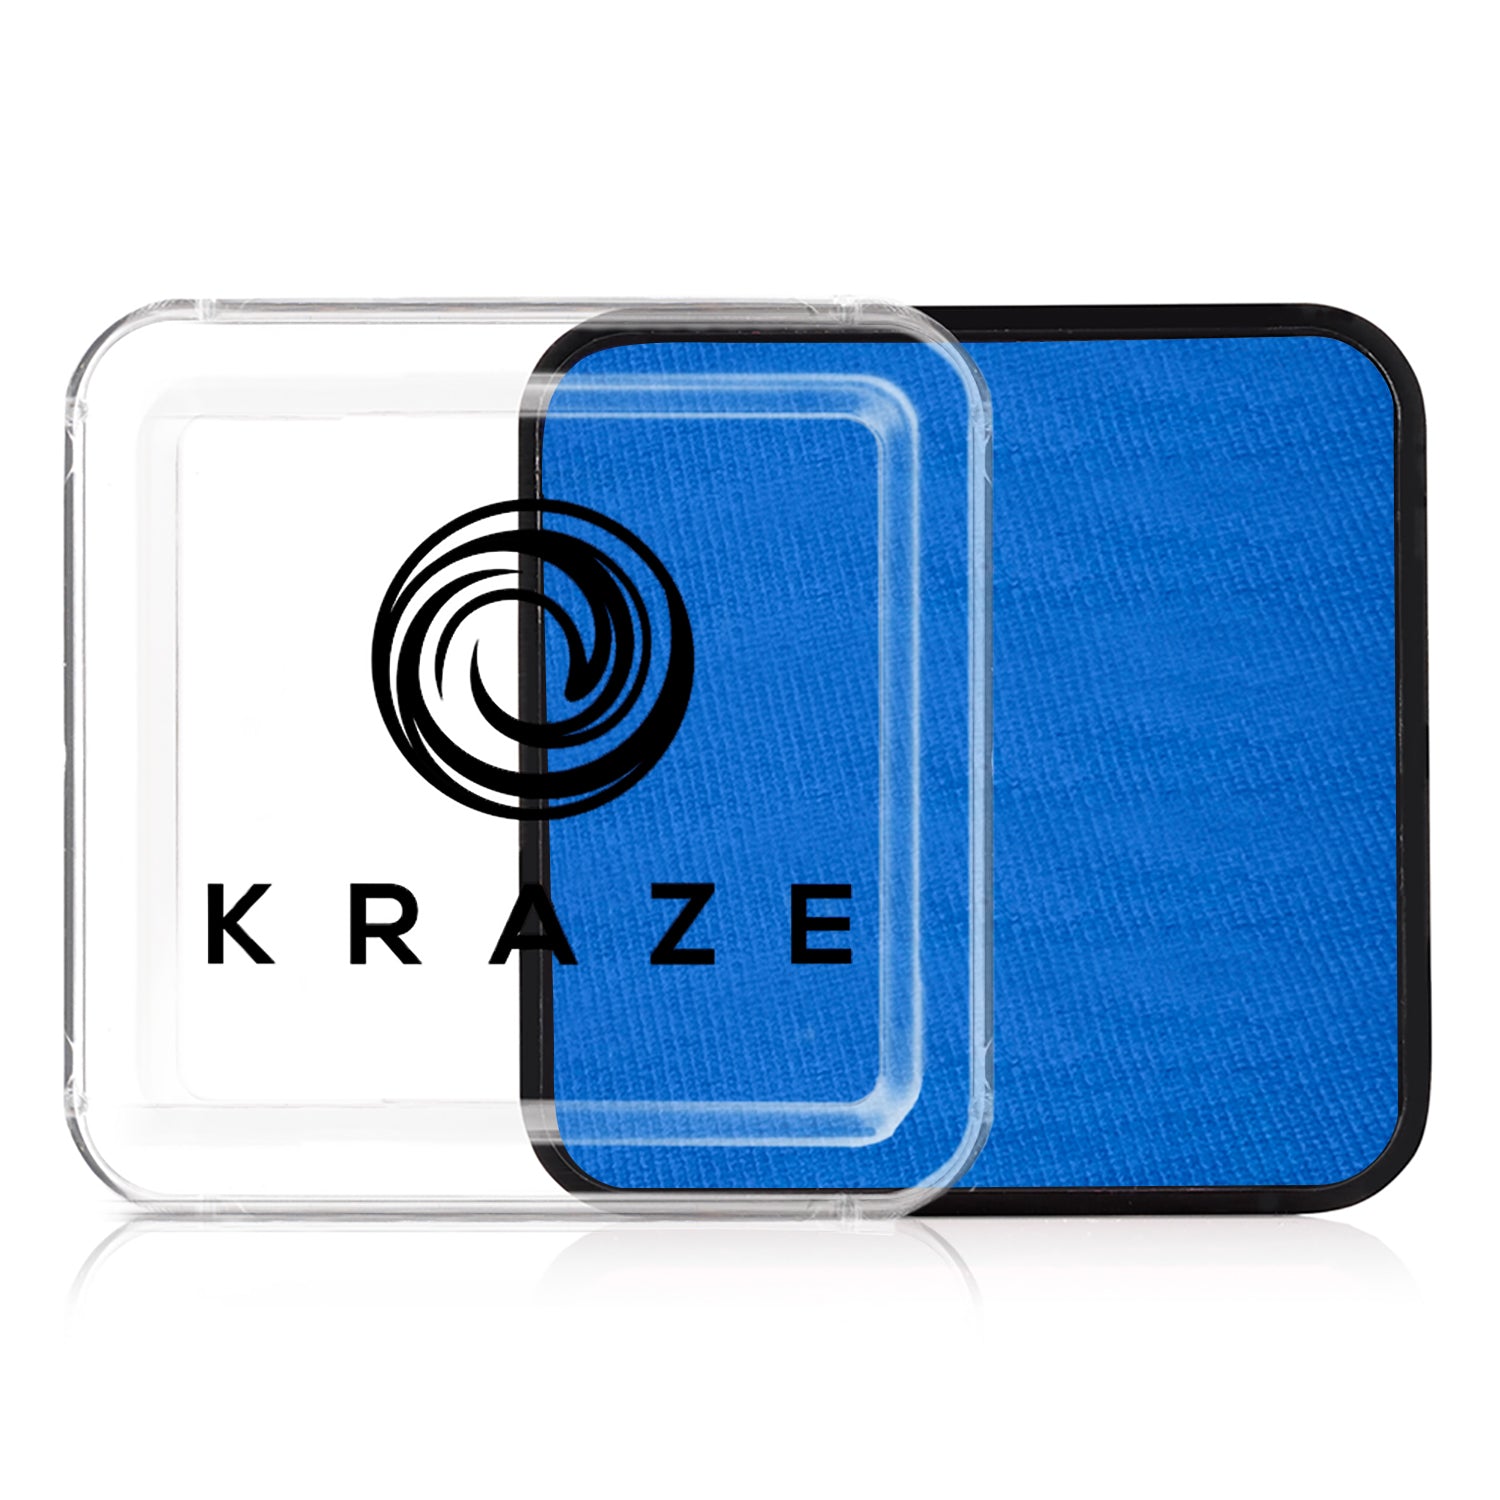 Kraze FX Face Paint - 25 gm - Olympic Blue (Non Staining)